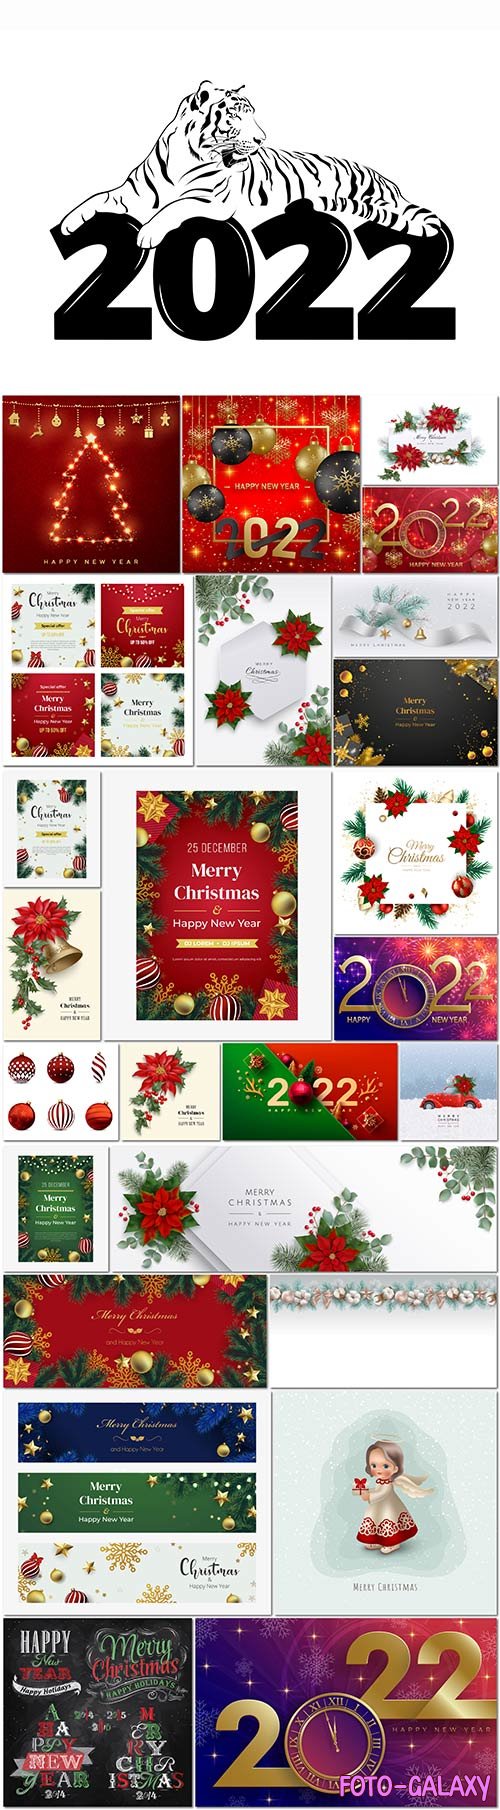 Christmas and New Year set in vector, Christmas toys, Santa, garlands, holiday decorations